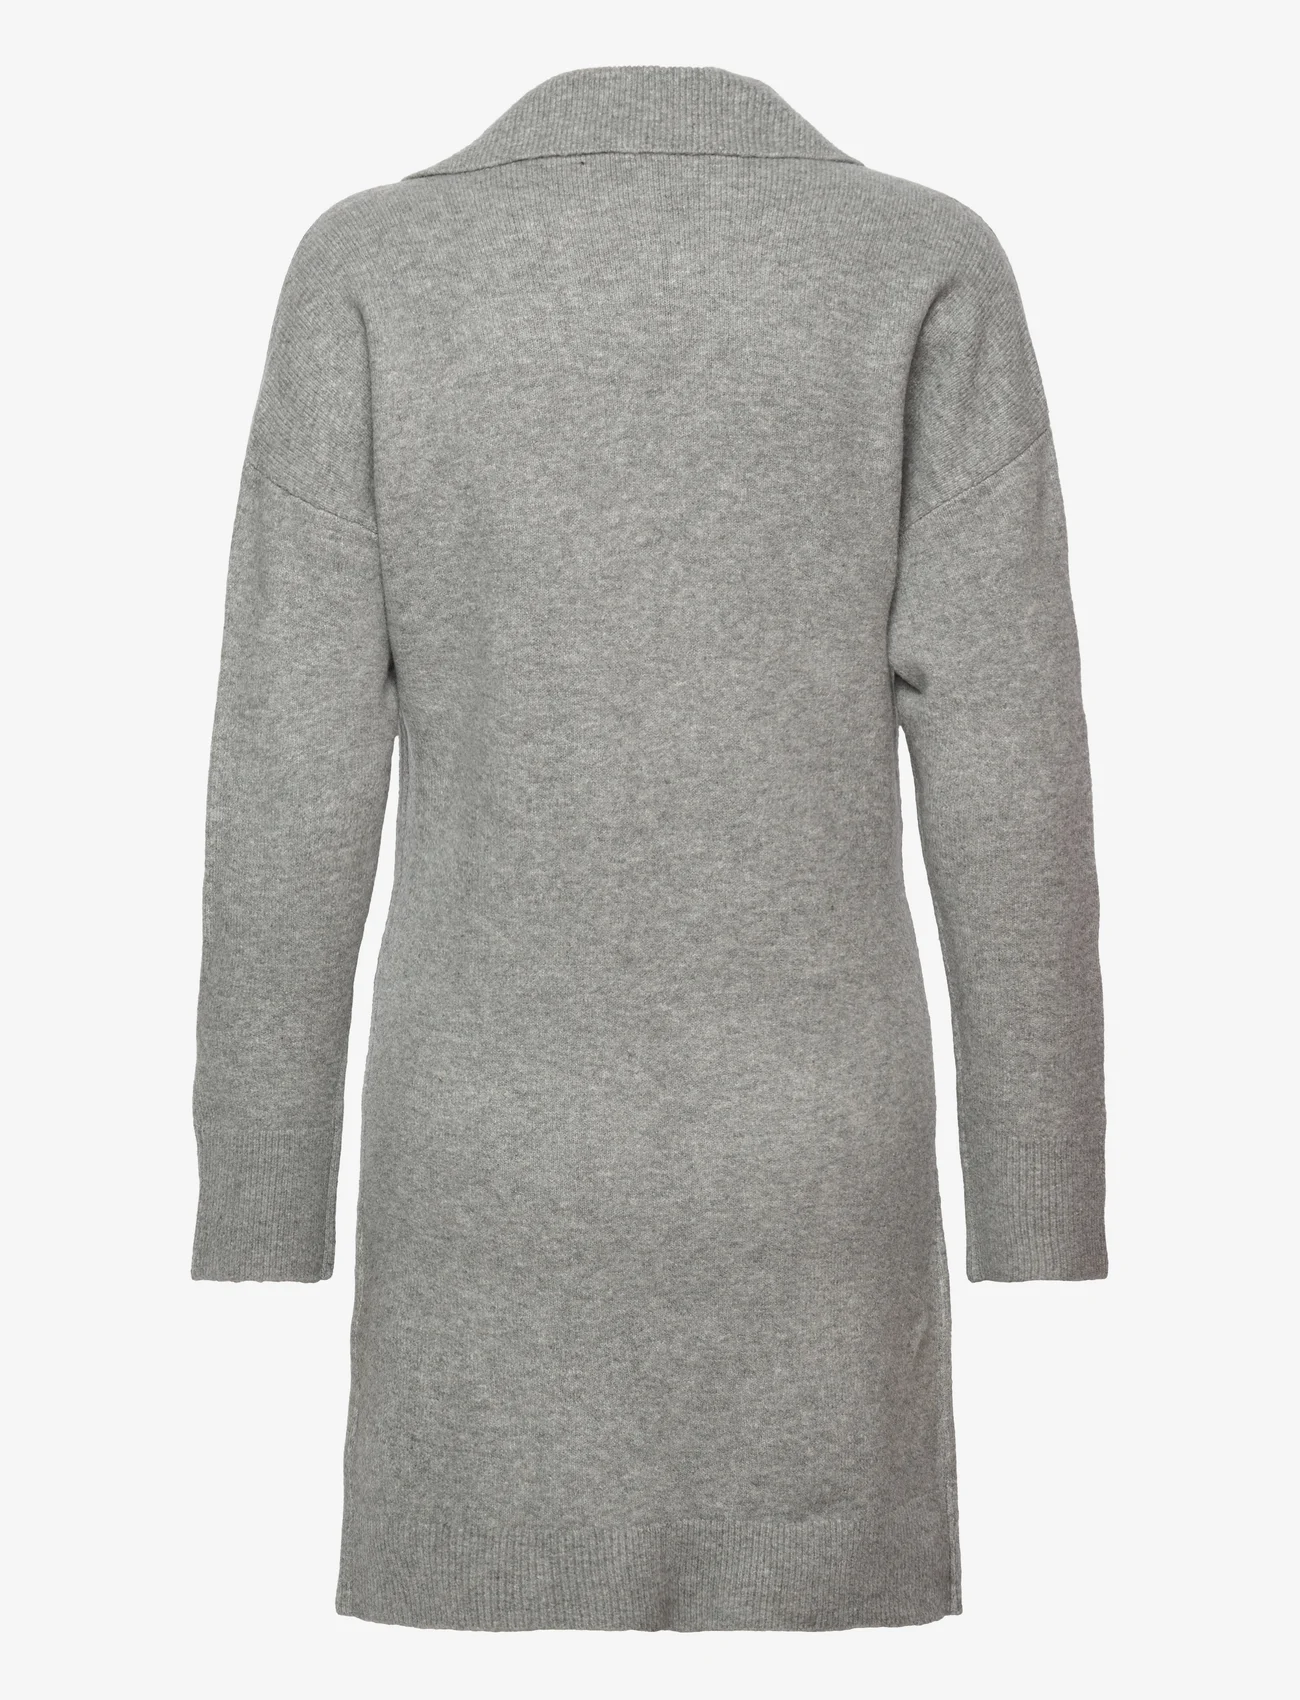 Abercrombie & Fitch - ANF WOMENS DRESSES - knitted dresses - gray heather - 1